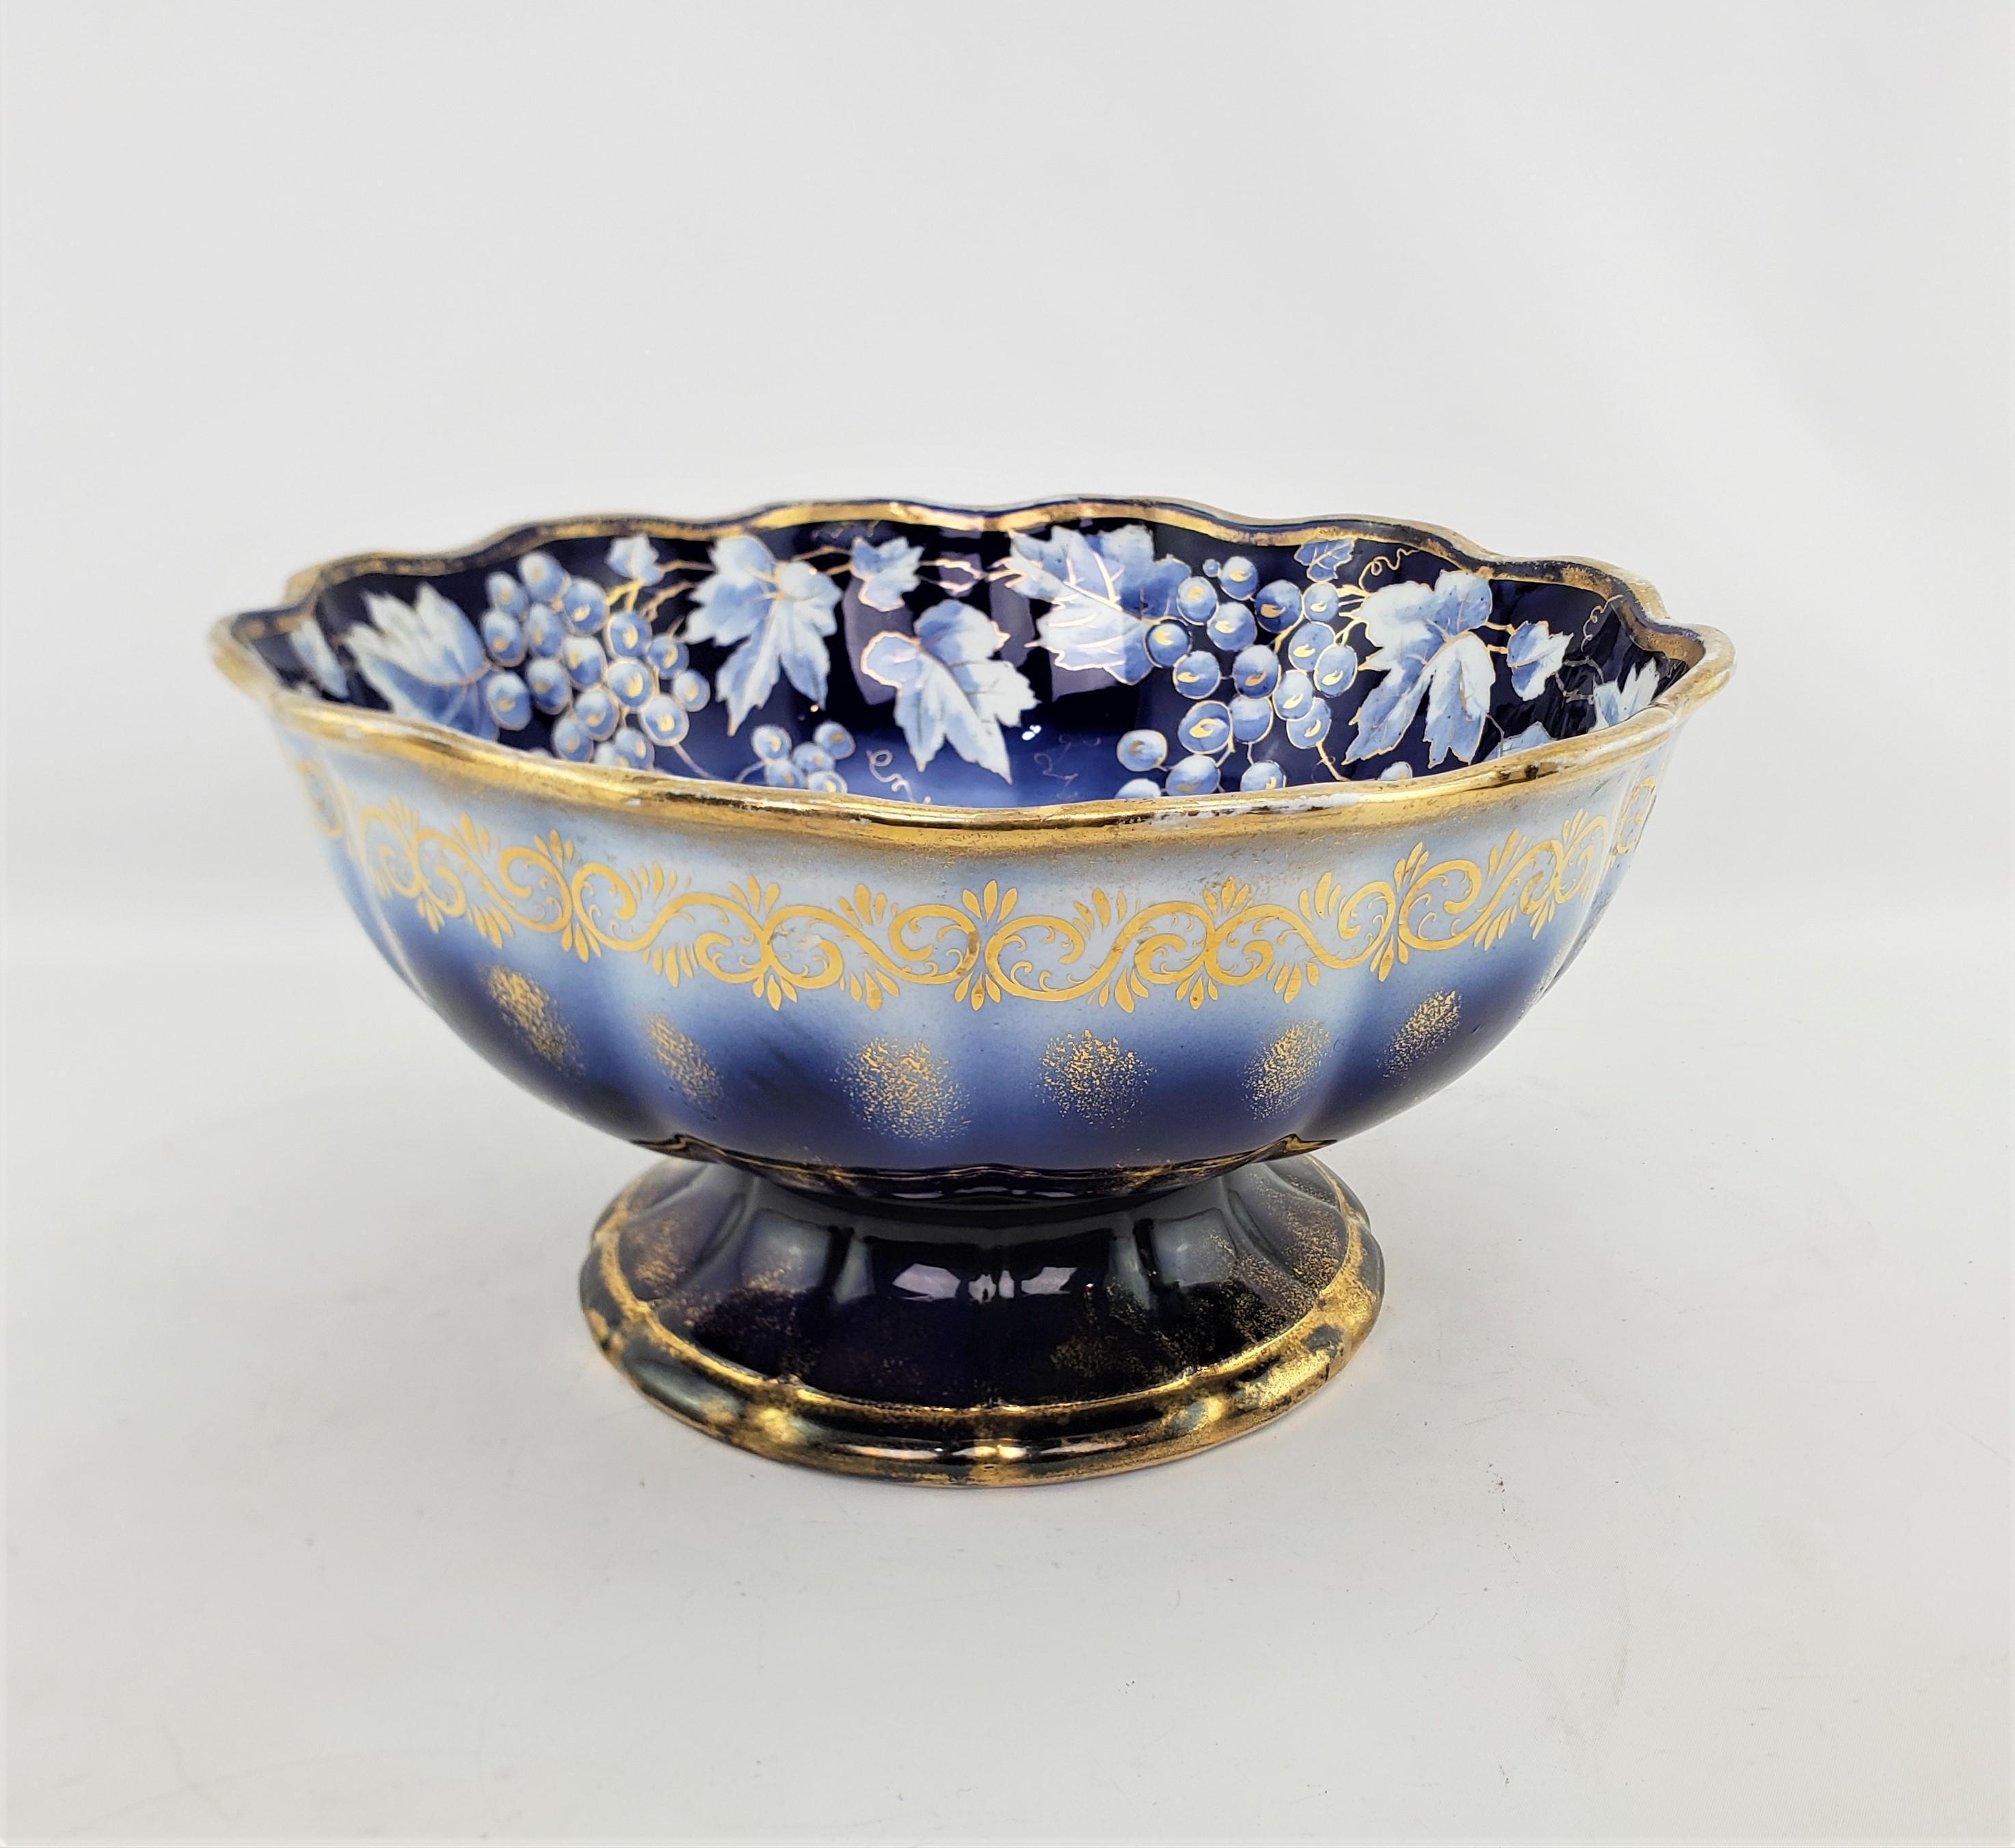 This very large antique bowl was made by the American China Company of the United States and dates to approximately 1880 and done in a period Victorian style. The bowl is ceramic, or semi-porcelain as marked on the base, and is glazed with a cream